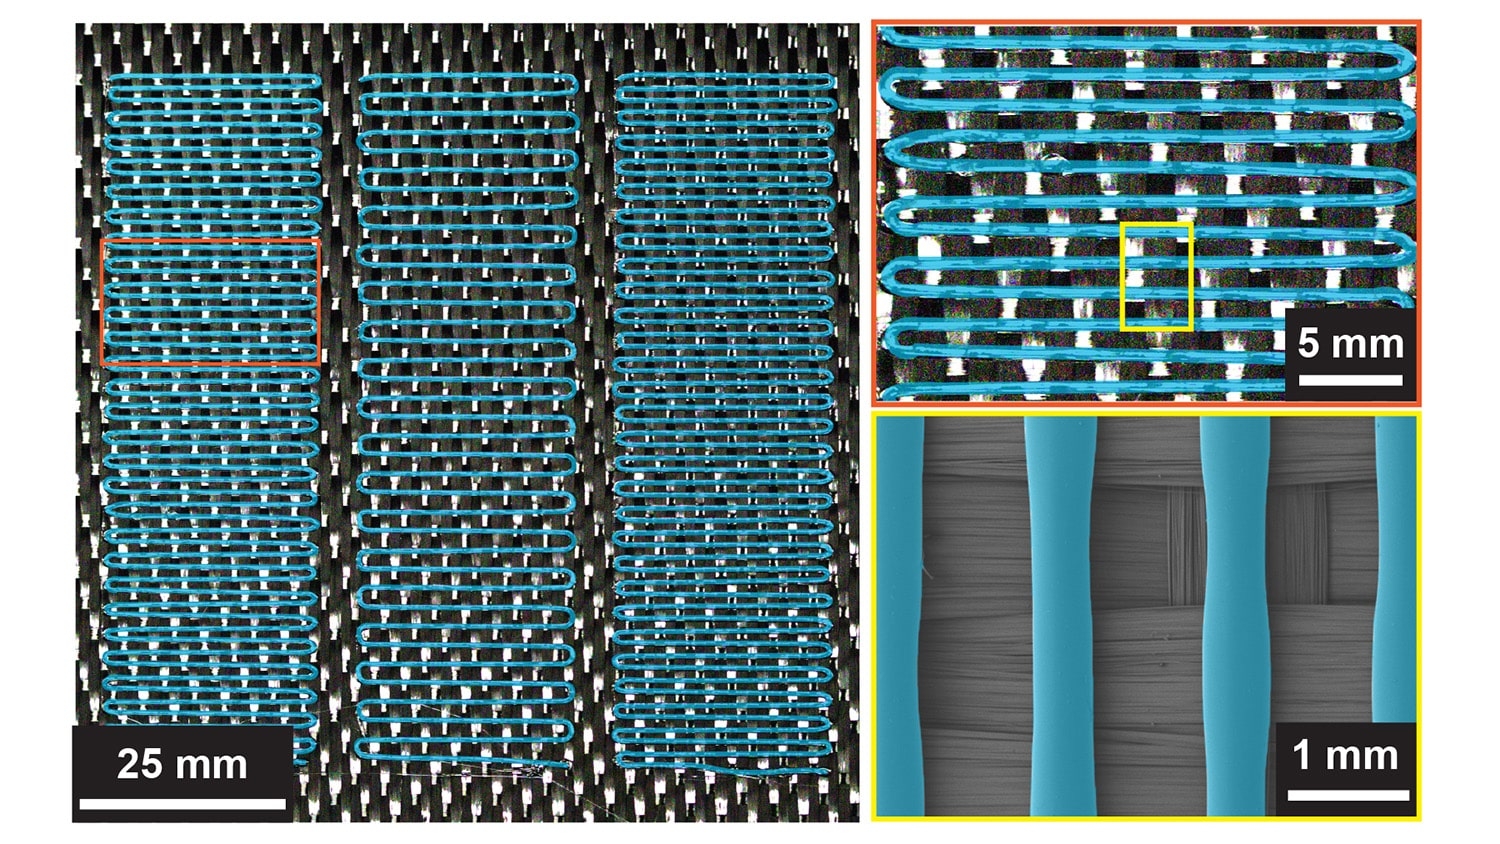 image shows blue piping (thermoplastic) embedded in a black carbon fiber mesh